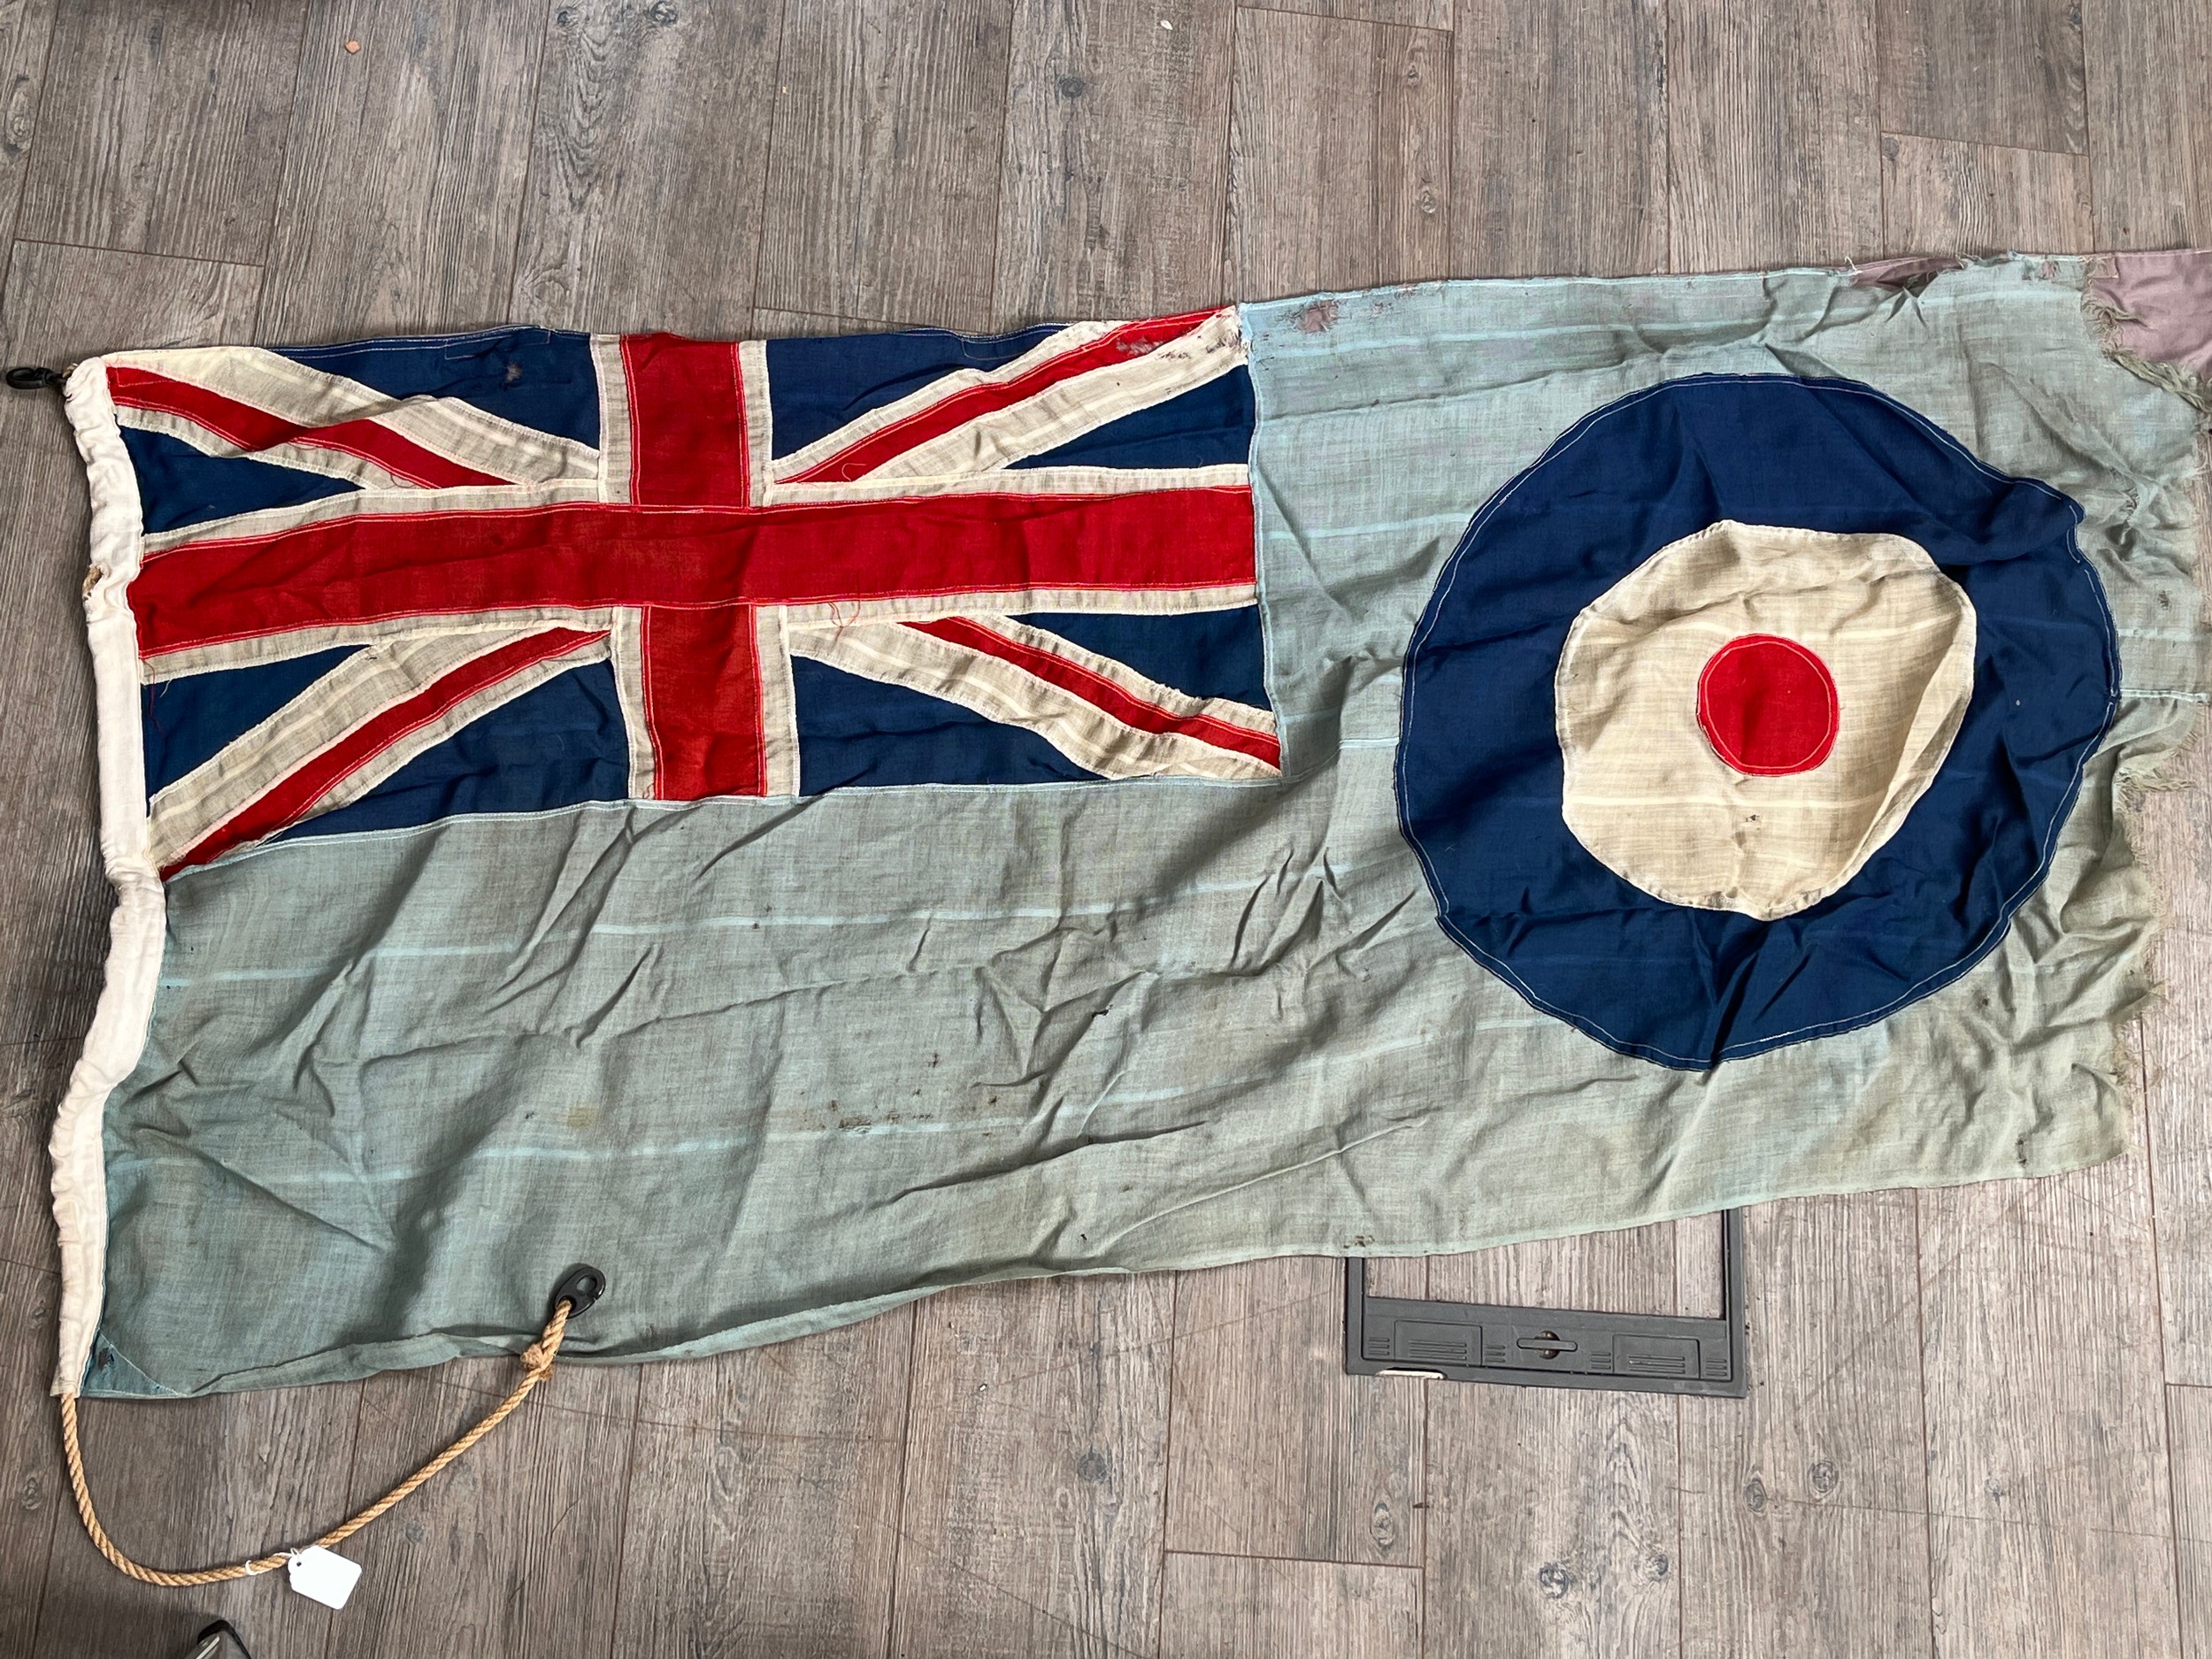 A WWII RAF flag reputedly removed from RAF St. Mawgan (now Newquay Airport) in 1945. Worn with